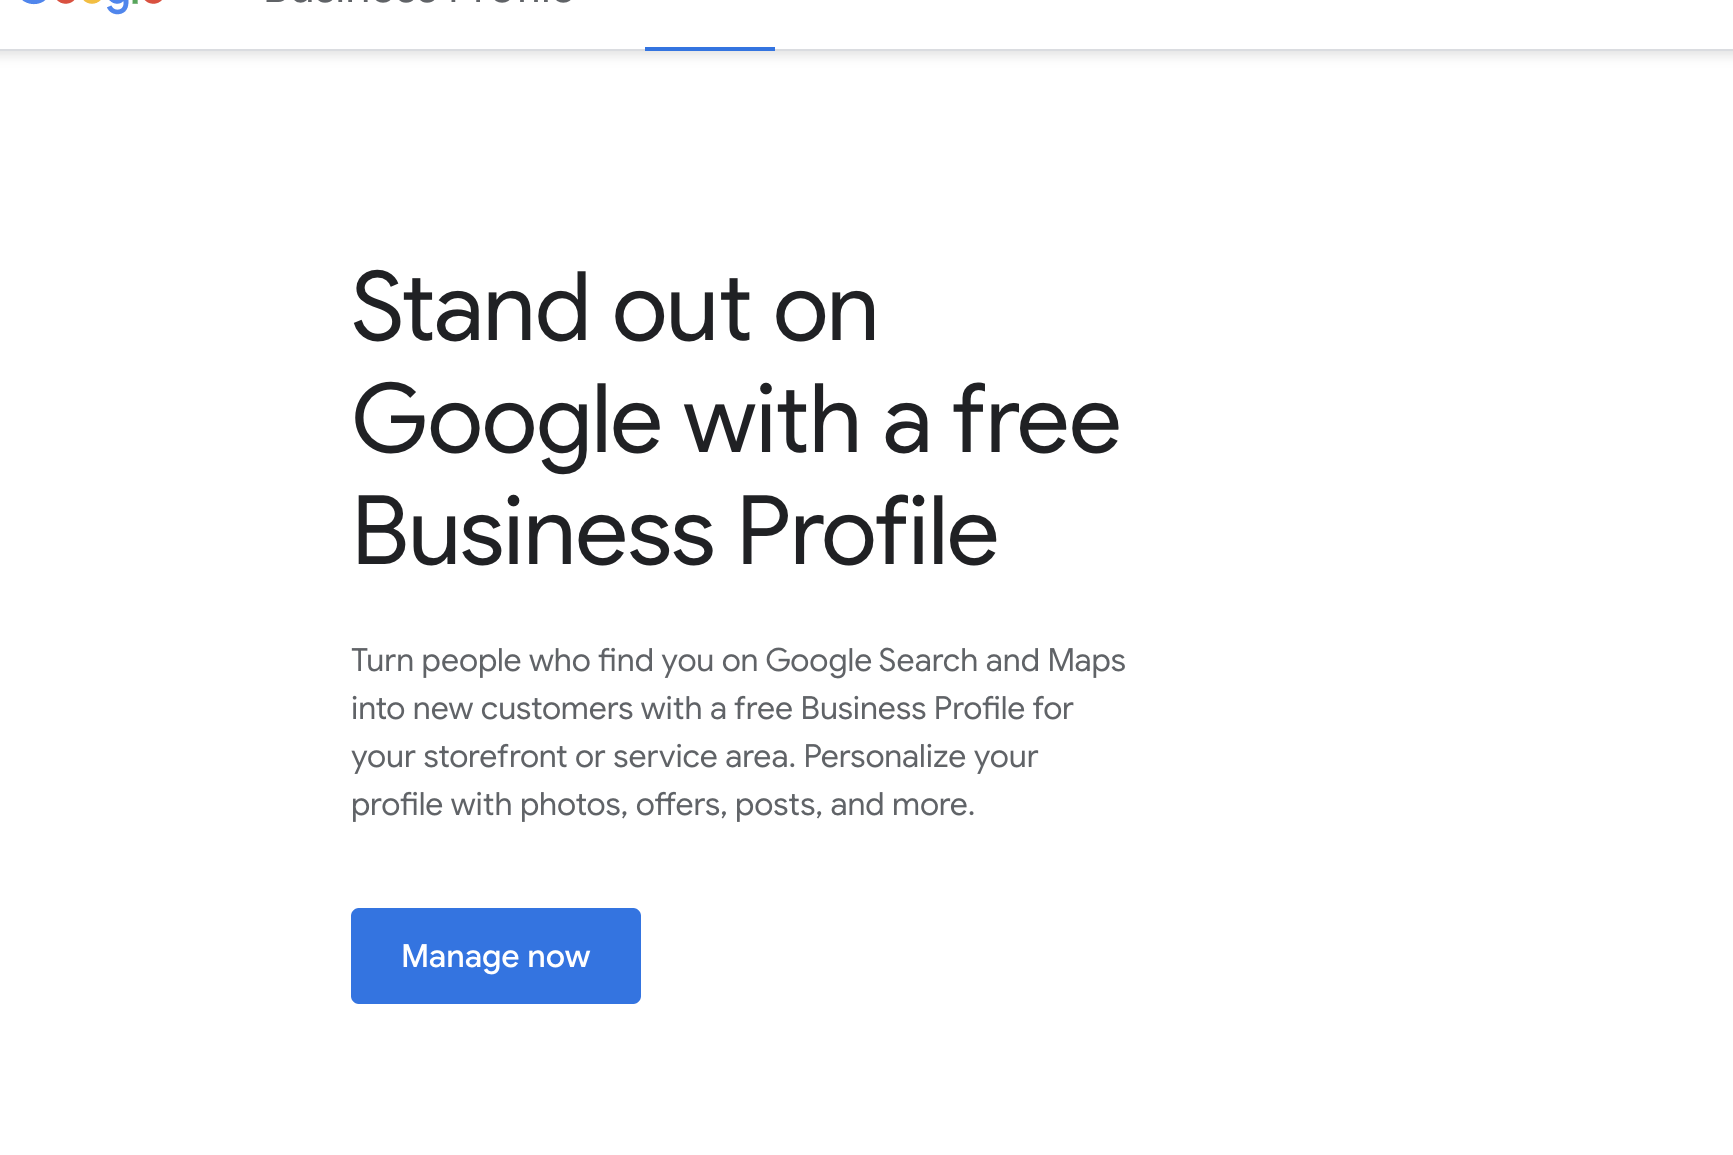 Google Business Profile is an essential part of any local SEO checklist